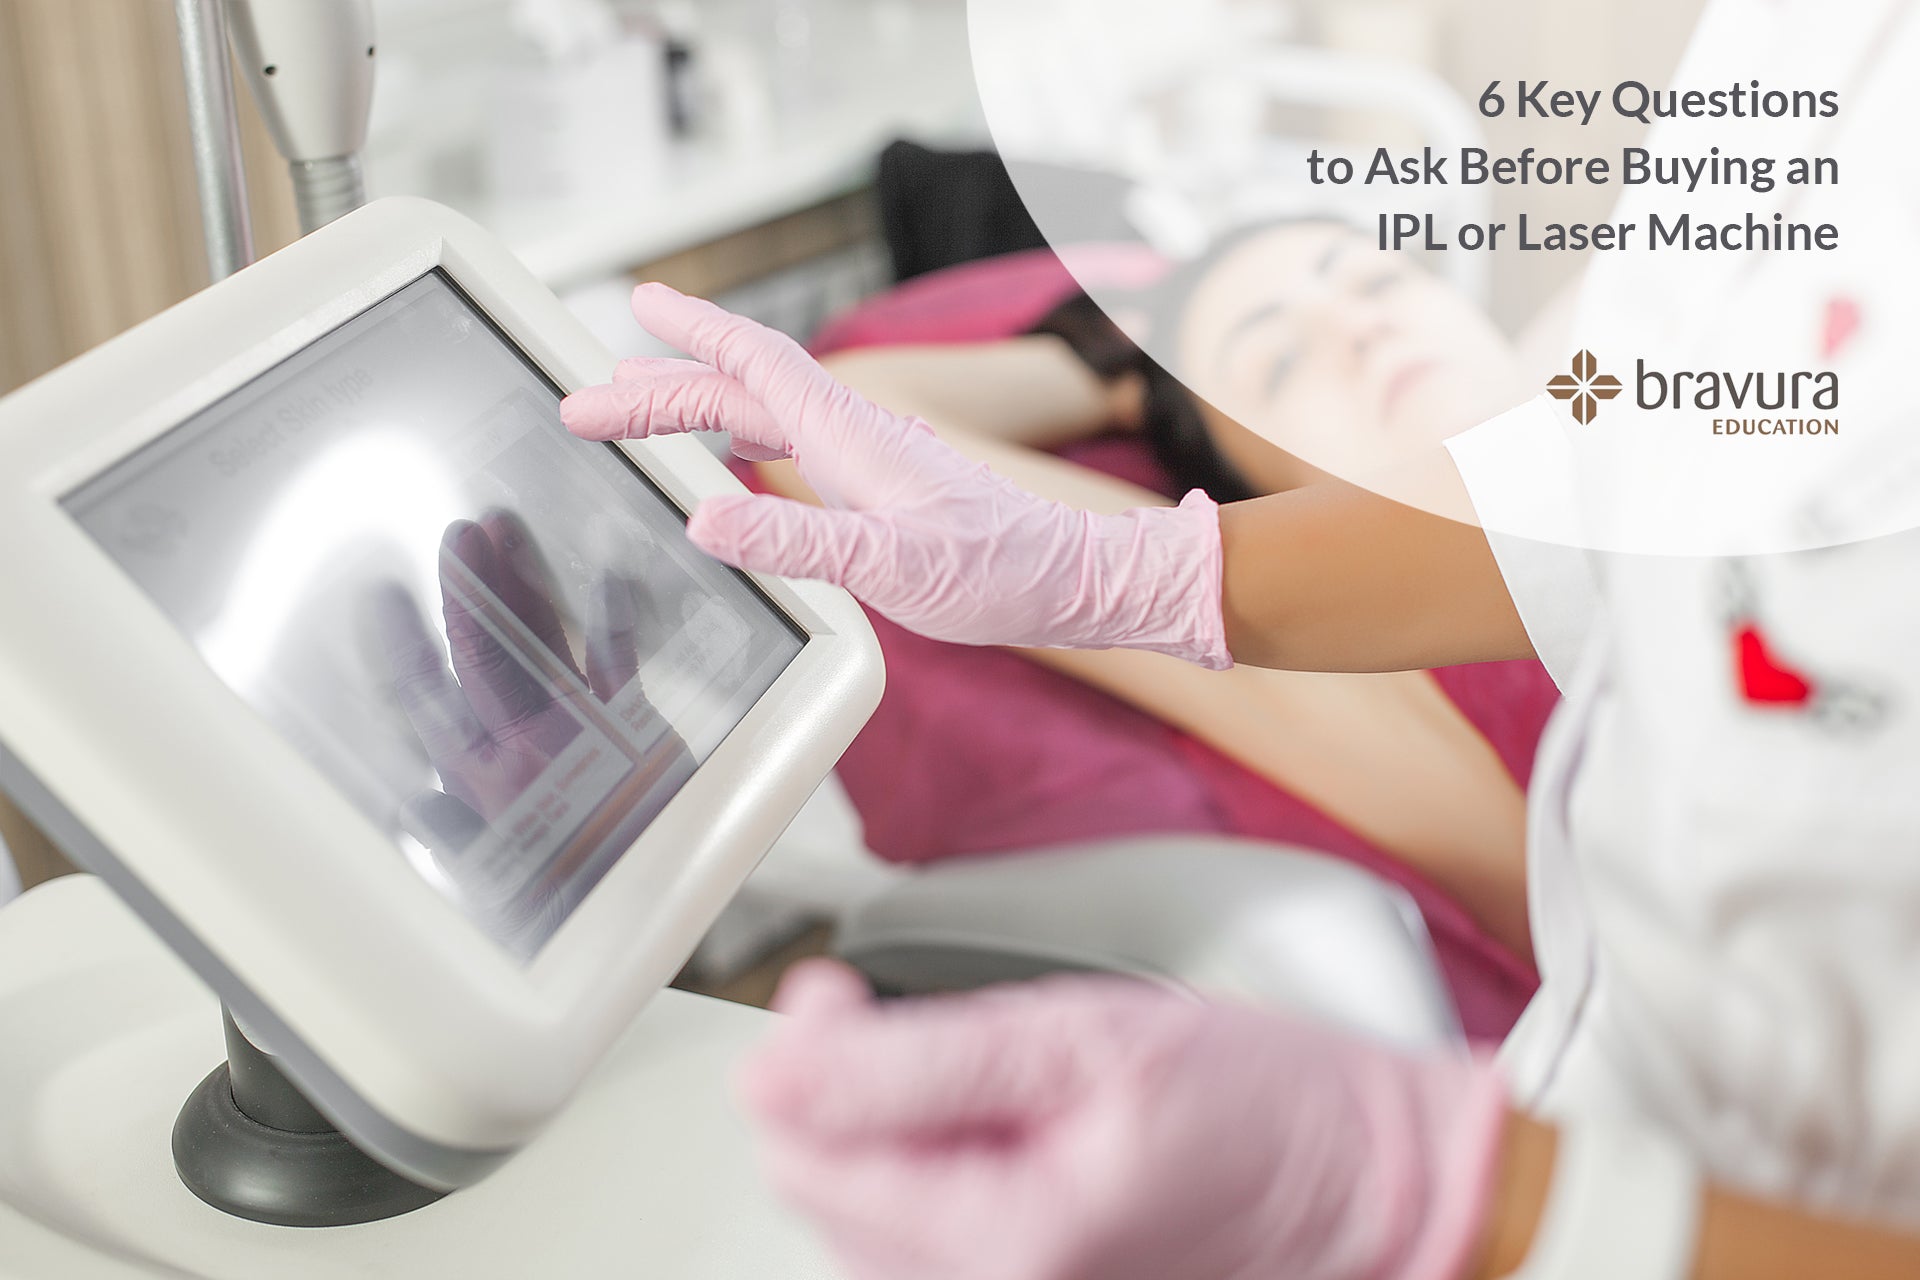 How to buy an IPL or Laser Machine